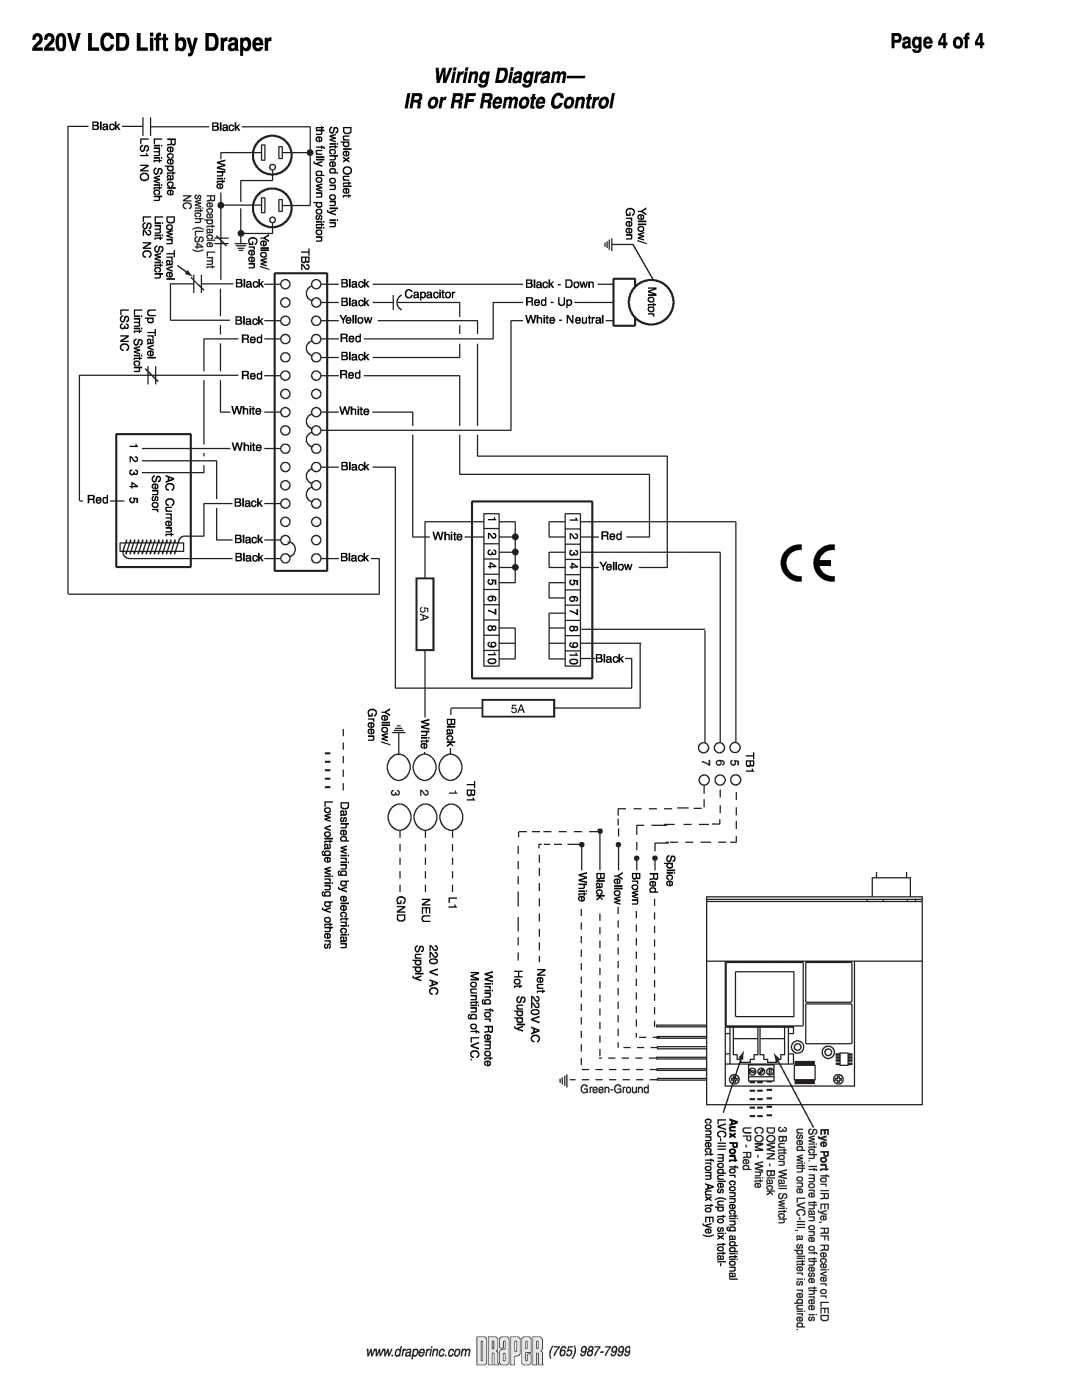 Draper LCD Lift Video Projector dimensions Page 4 of, IR or RF Remote Control, 220V LCD Lift by Draper, Wiring Diagram 